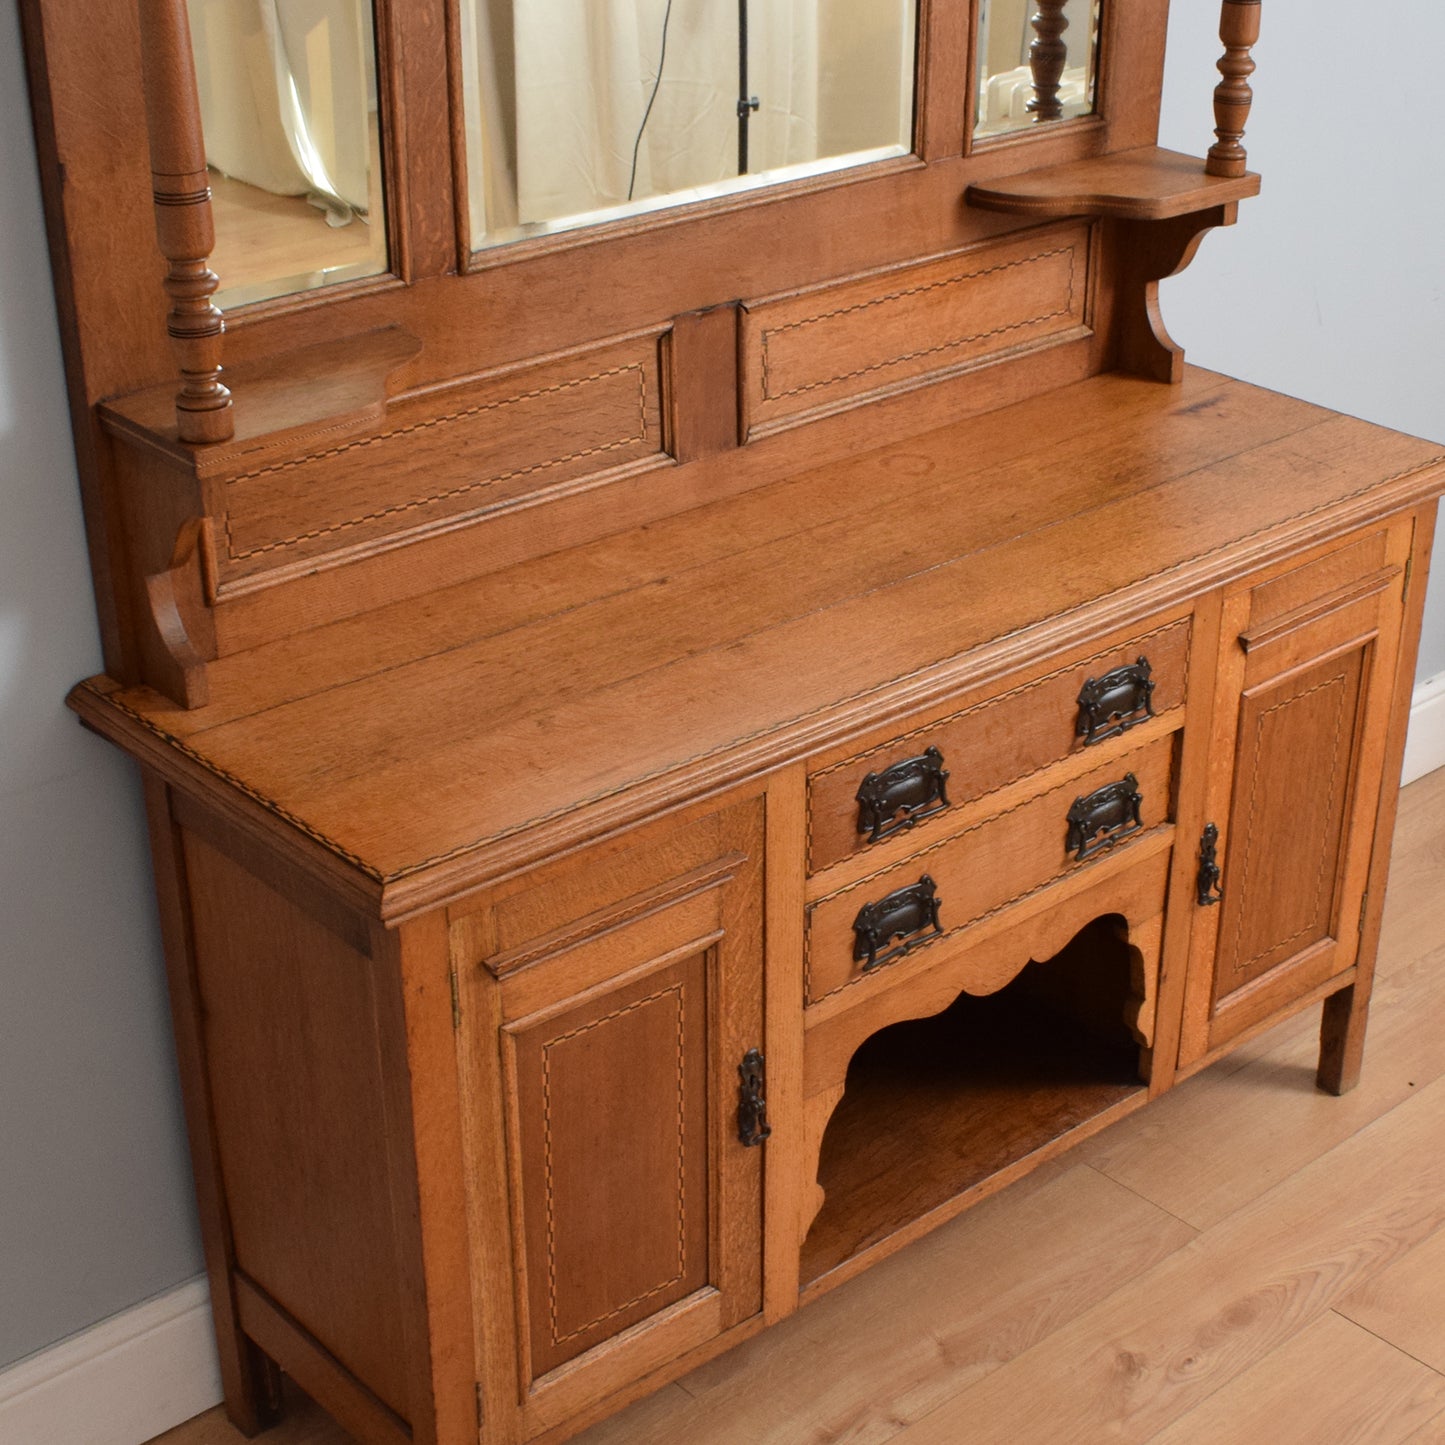 Arts and Crafts Mirrored Sideboard